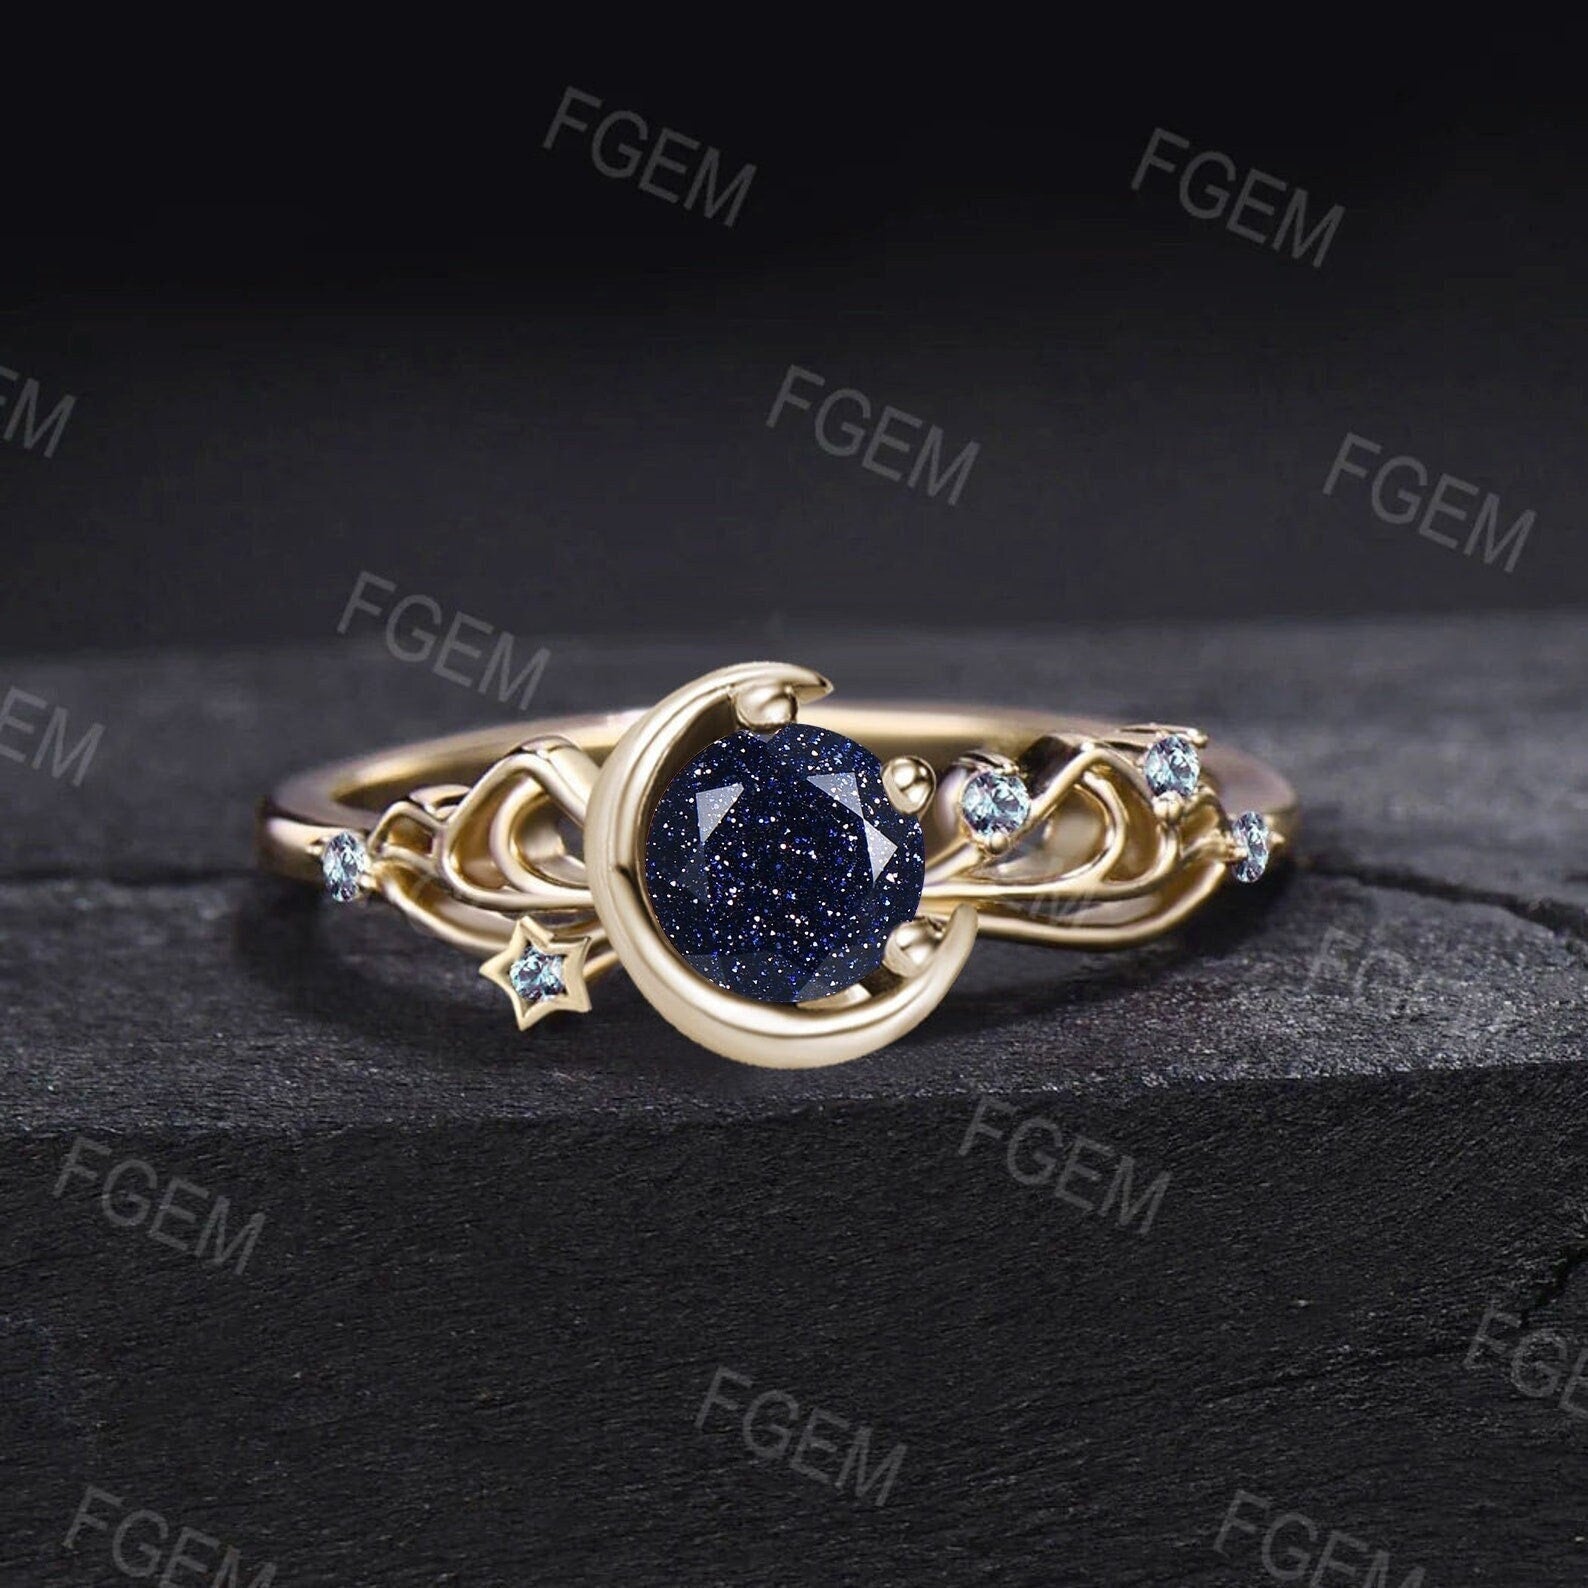 Sailor Moon Inspired Round Galaxy Blue Sandstone Engagement Rings 10K Yellow Gold Bowknot Cluster Alexandrite Crescent Moon Wedding Rings